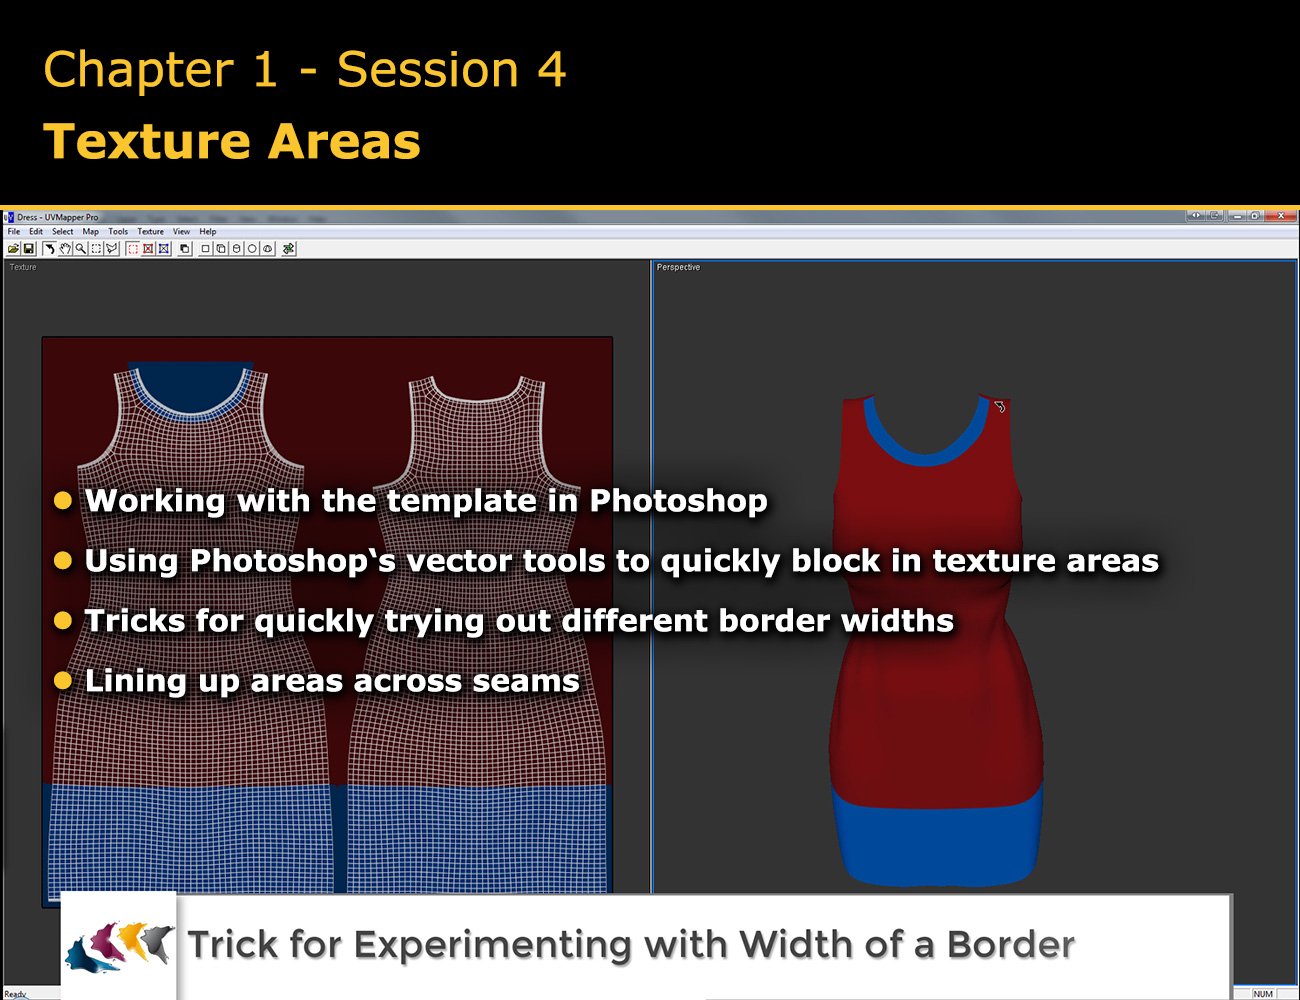 The Complete Guide to Texturing Clothing - Part 1 by: eshaCganDigital Art Live, 3D Models by Daz 3D